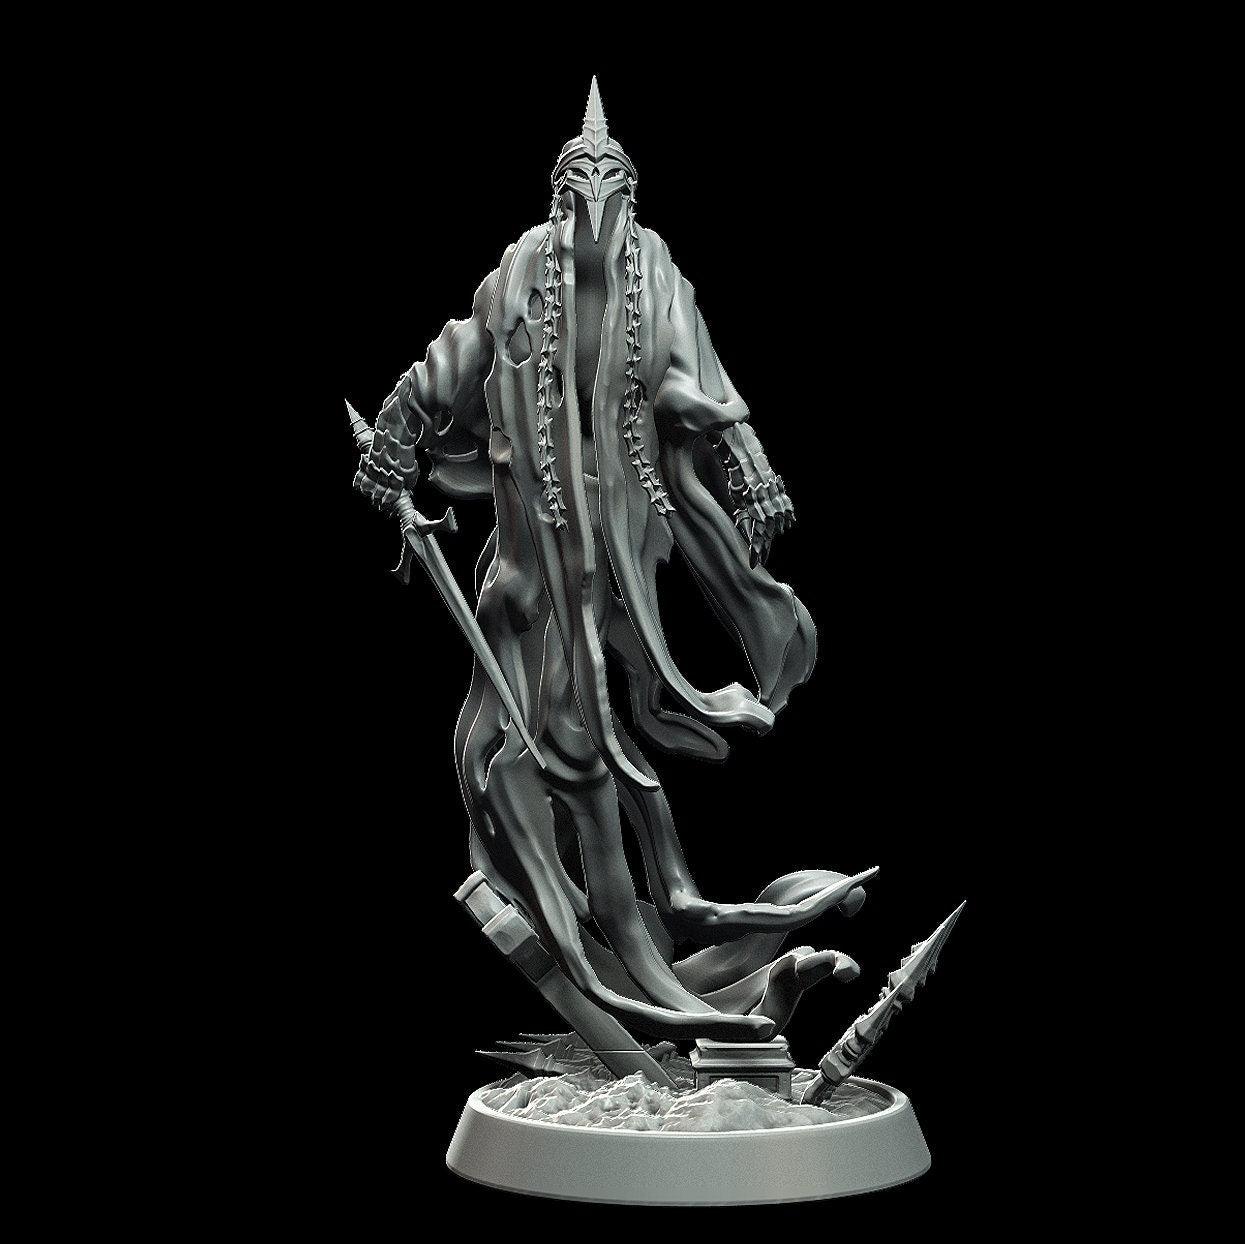 Damned Spirit Miniature - 3 Poses - 28mm scale Tabletop gaming DnD Miniature Dungeons and Dragons,dnd 5e - Plague Miniatures shop for DnD Miniatures